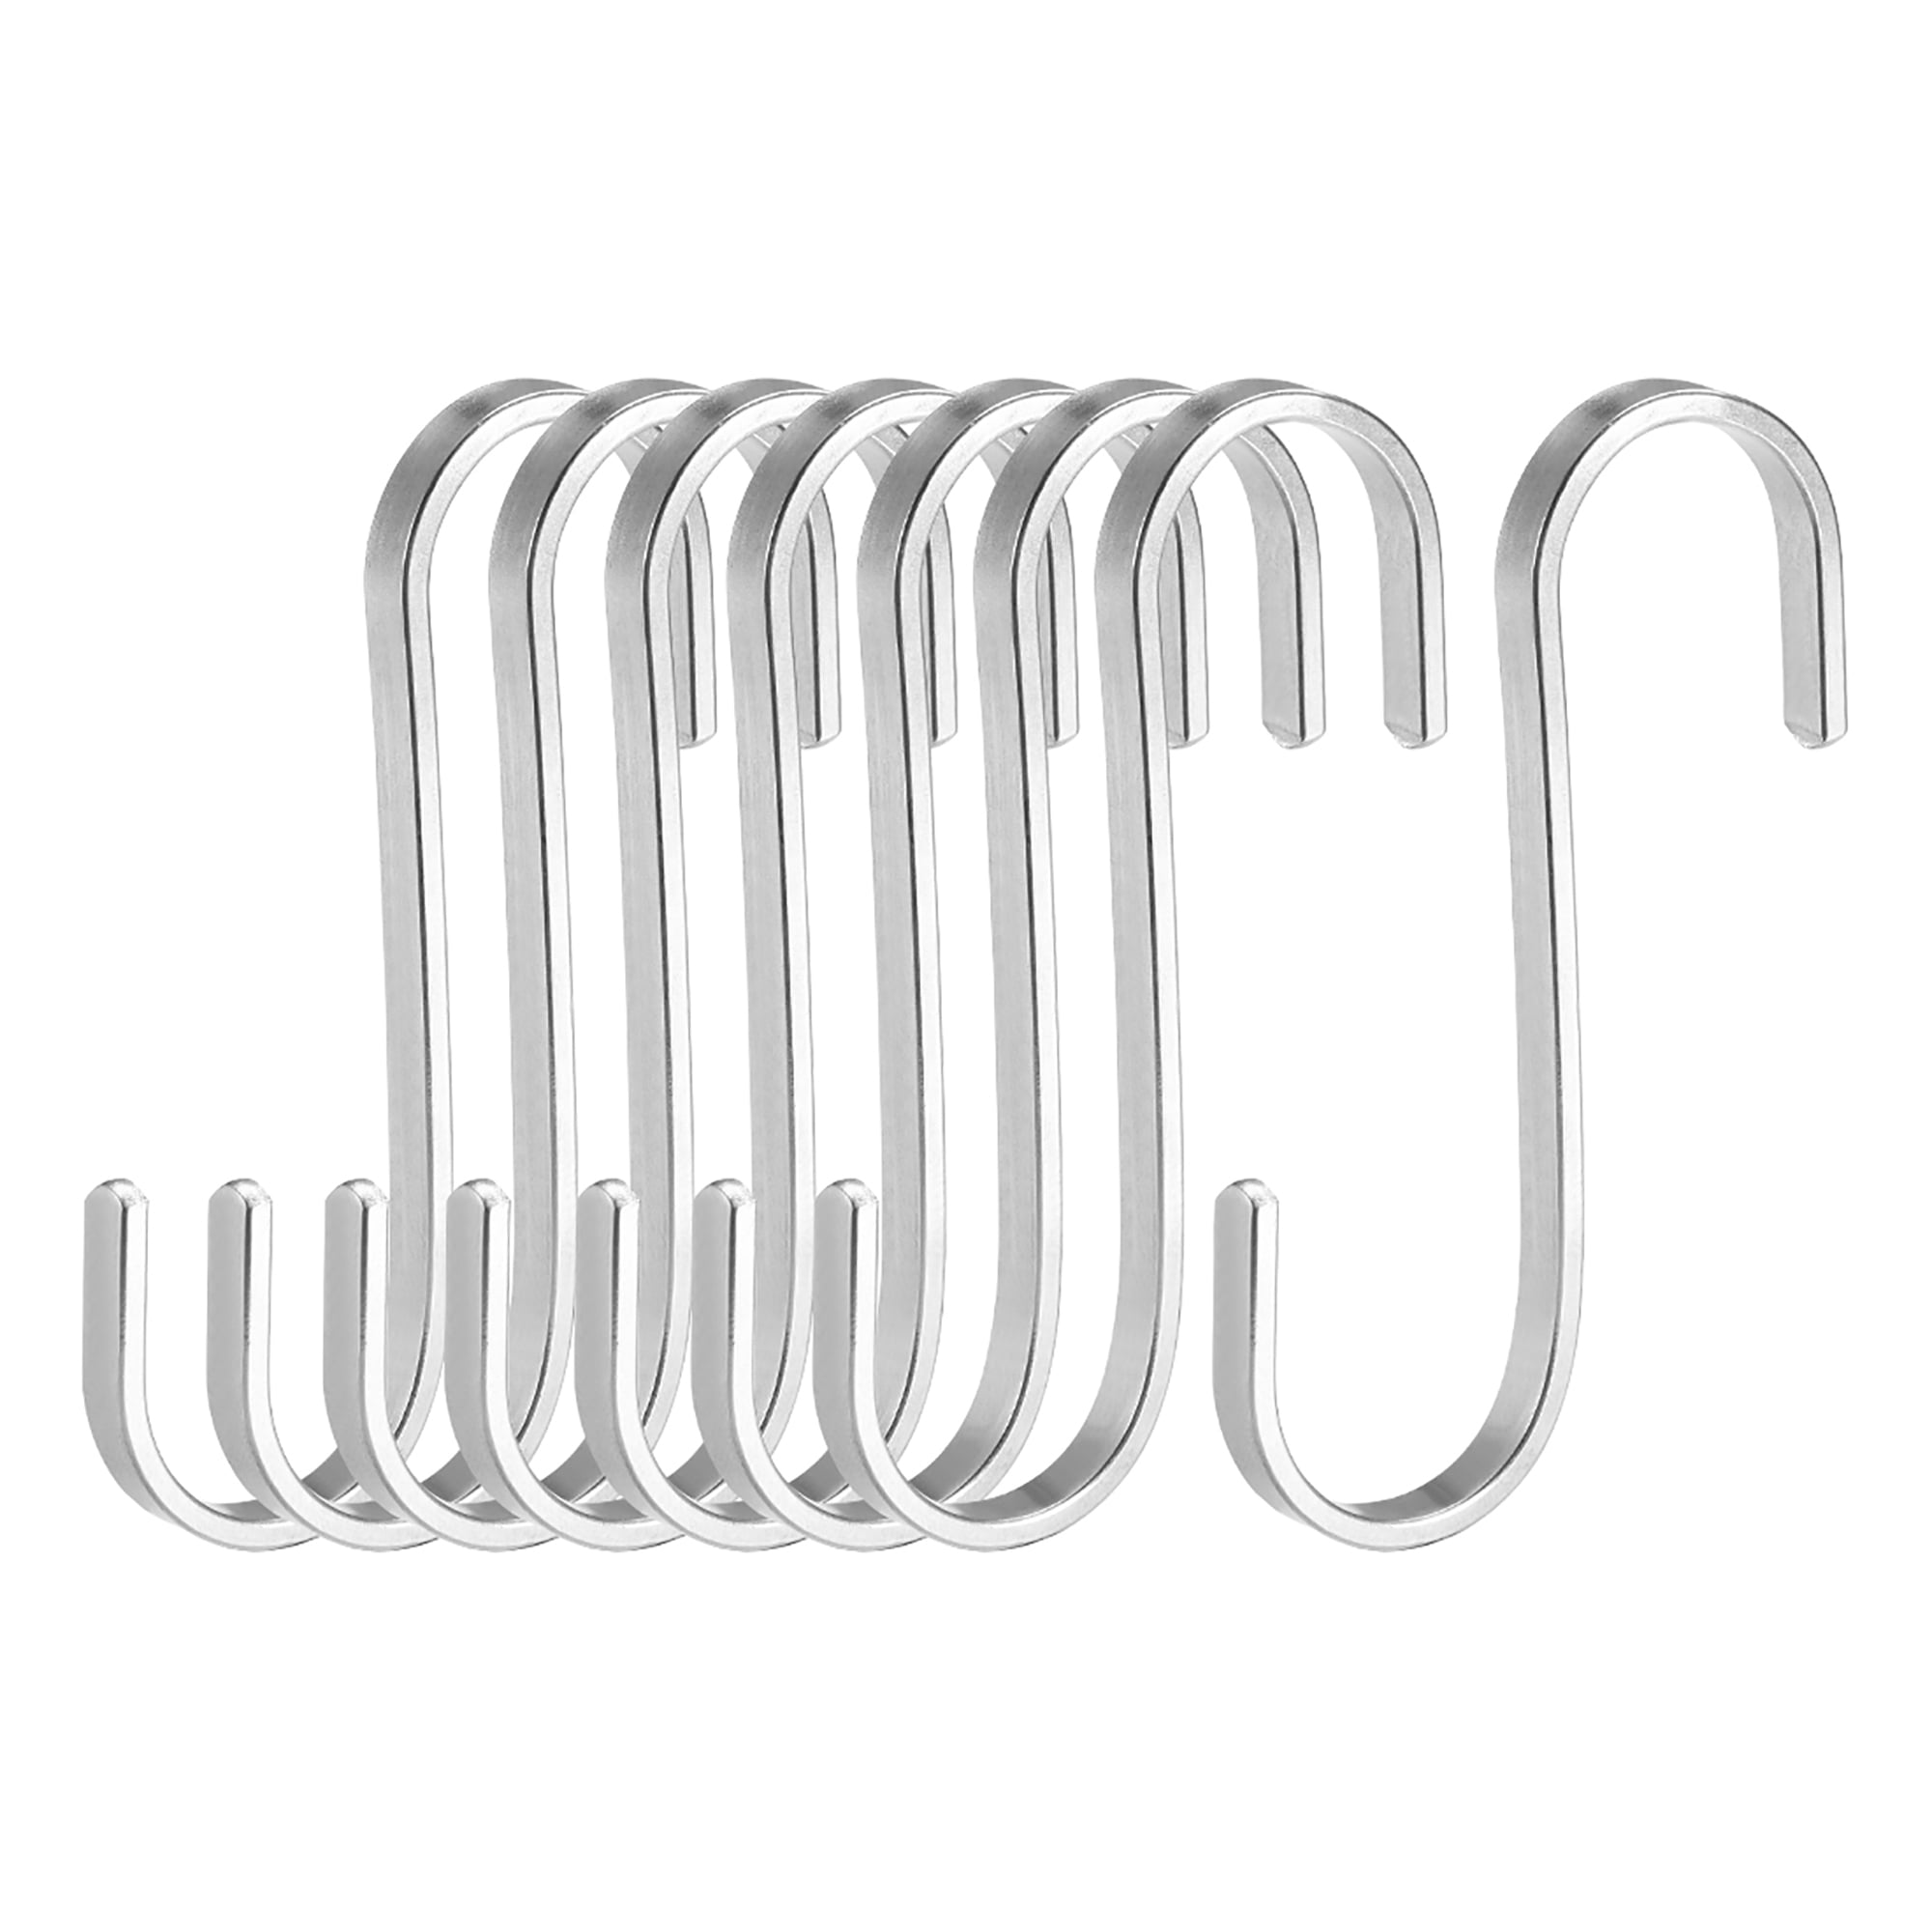 Quality Stainless Steel S Hooks Kitchen Meat Pan Utensil Clothes Hanger Hanging 